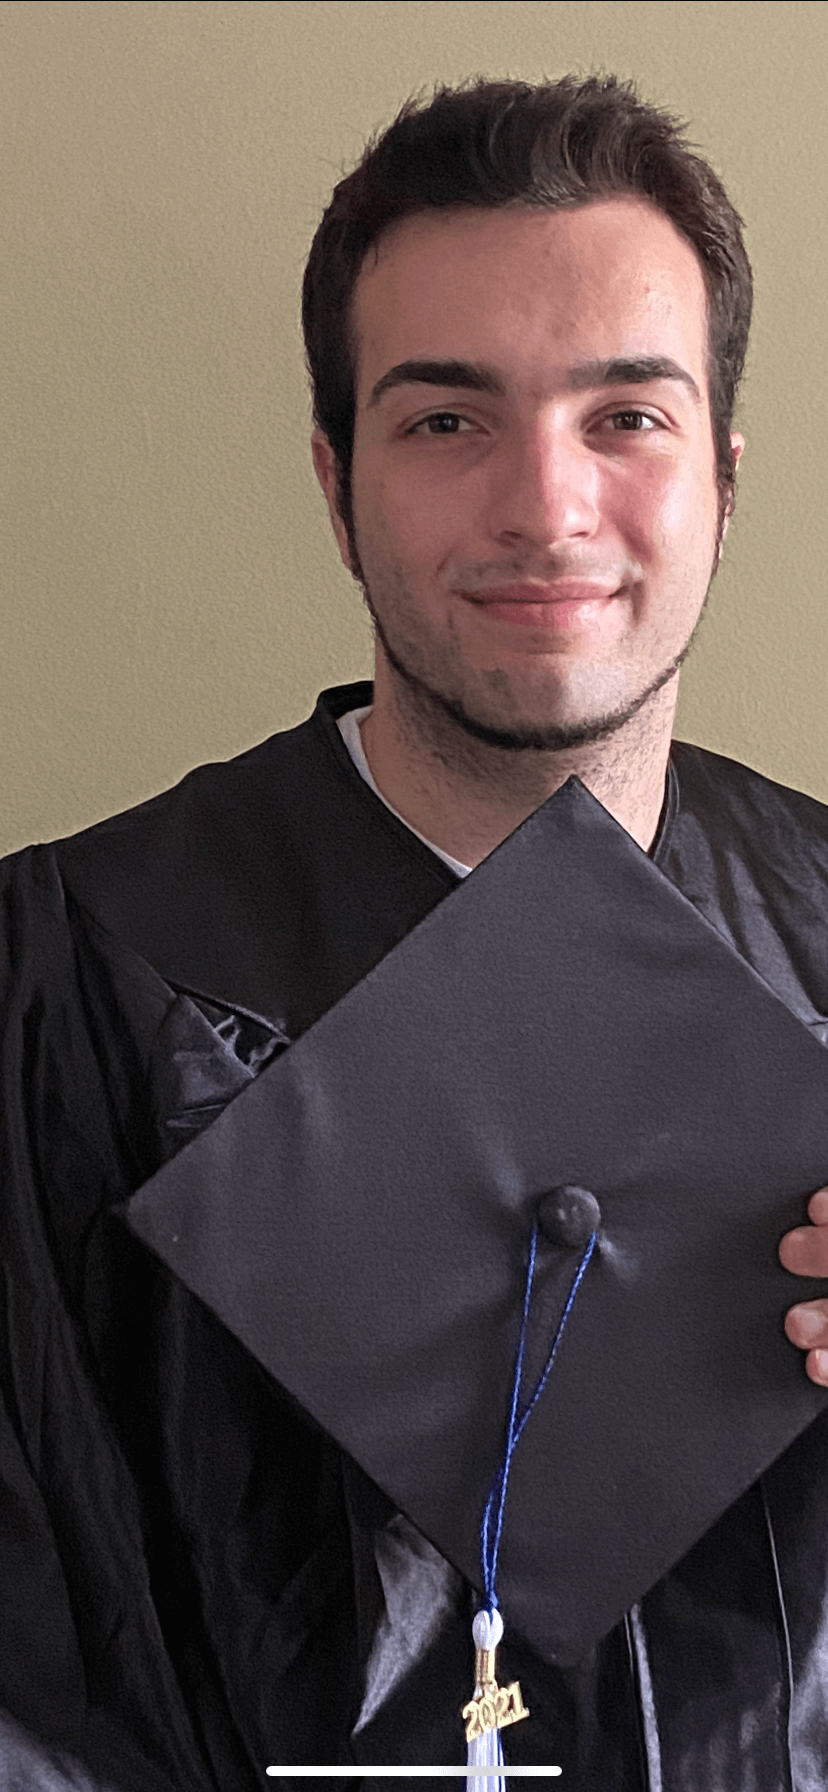 Image of Jesse Scali, QCC Commencement 2021